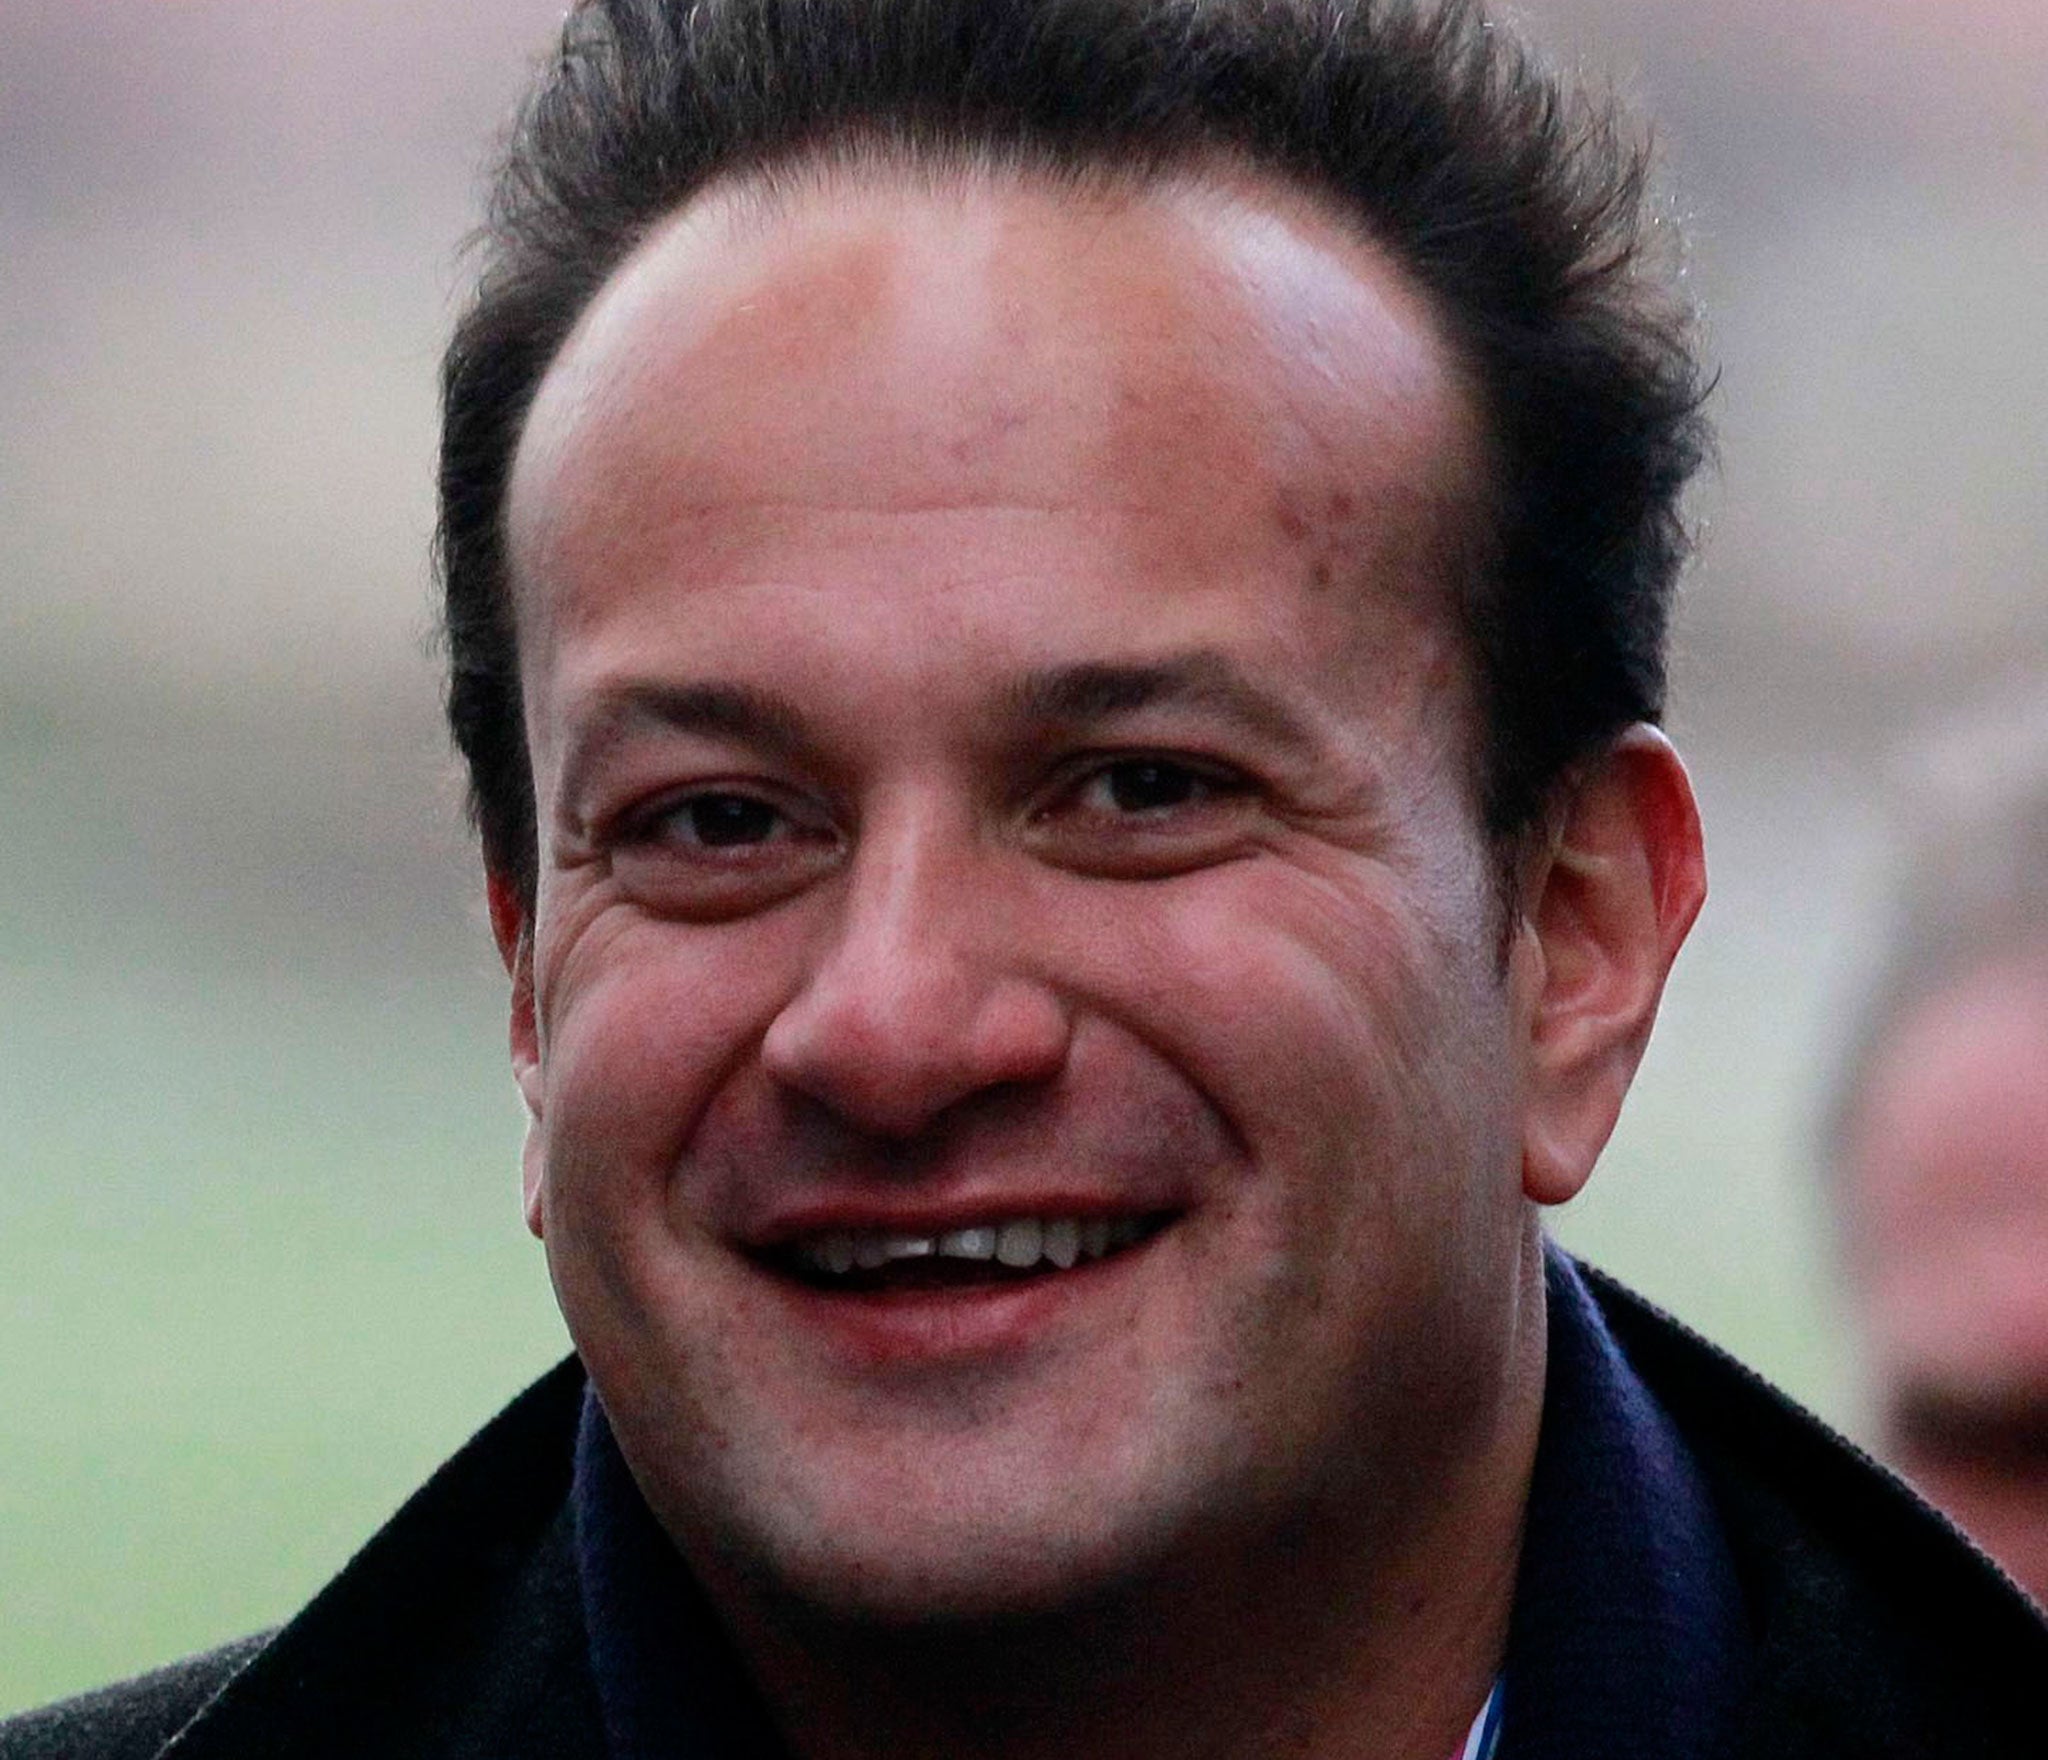 Ireland's health minister Leo Varadkar, 36, who has publicly come out as gay